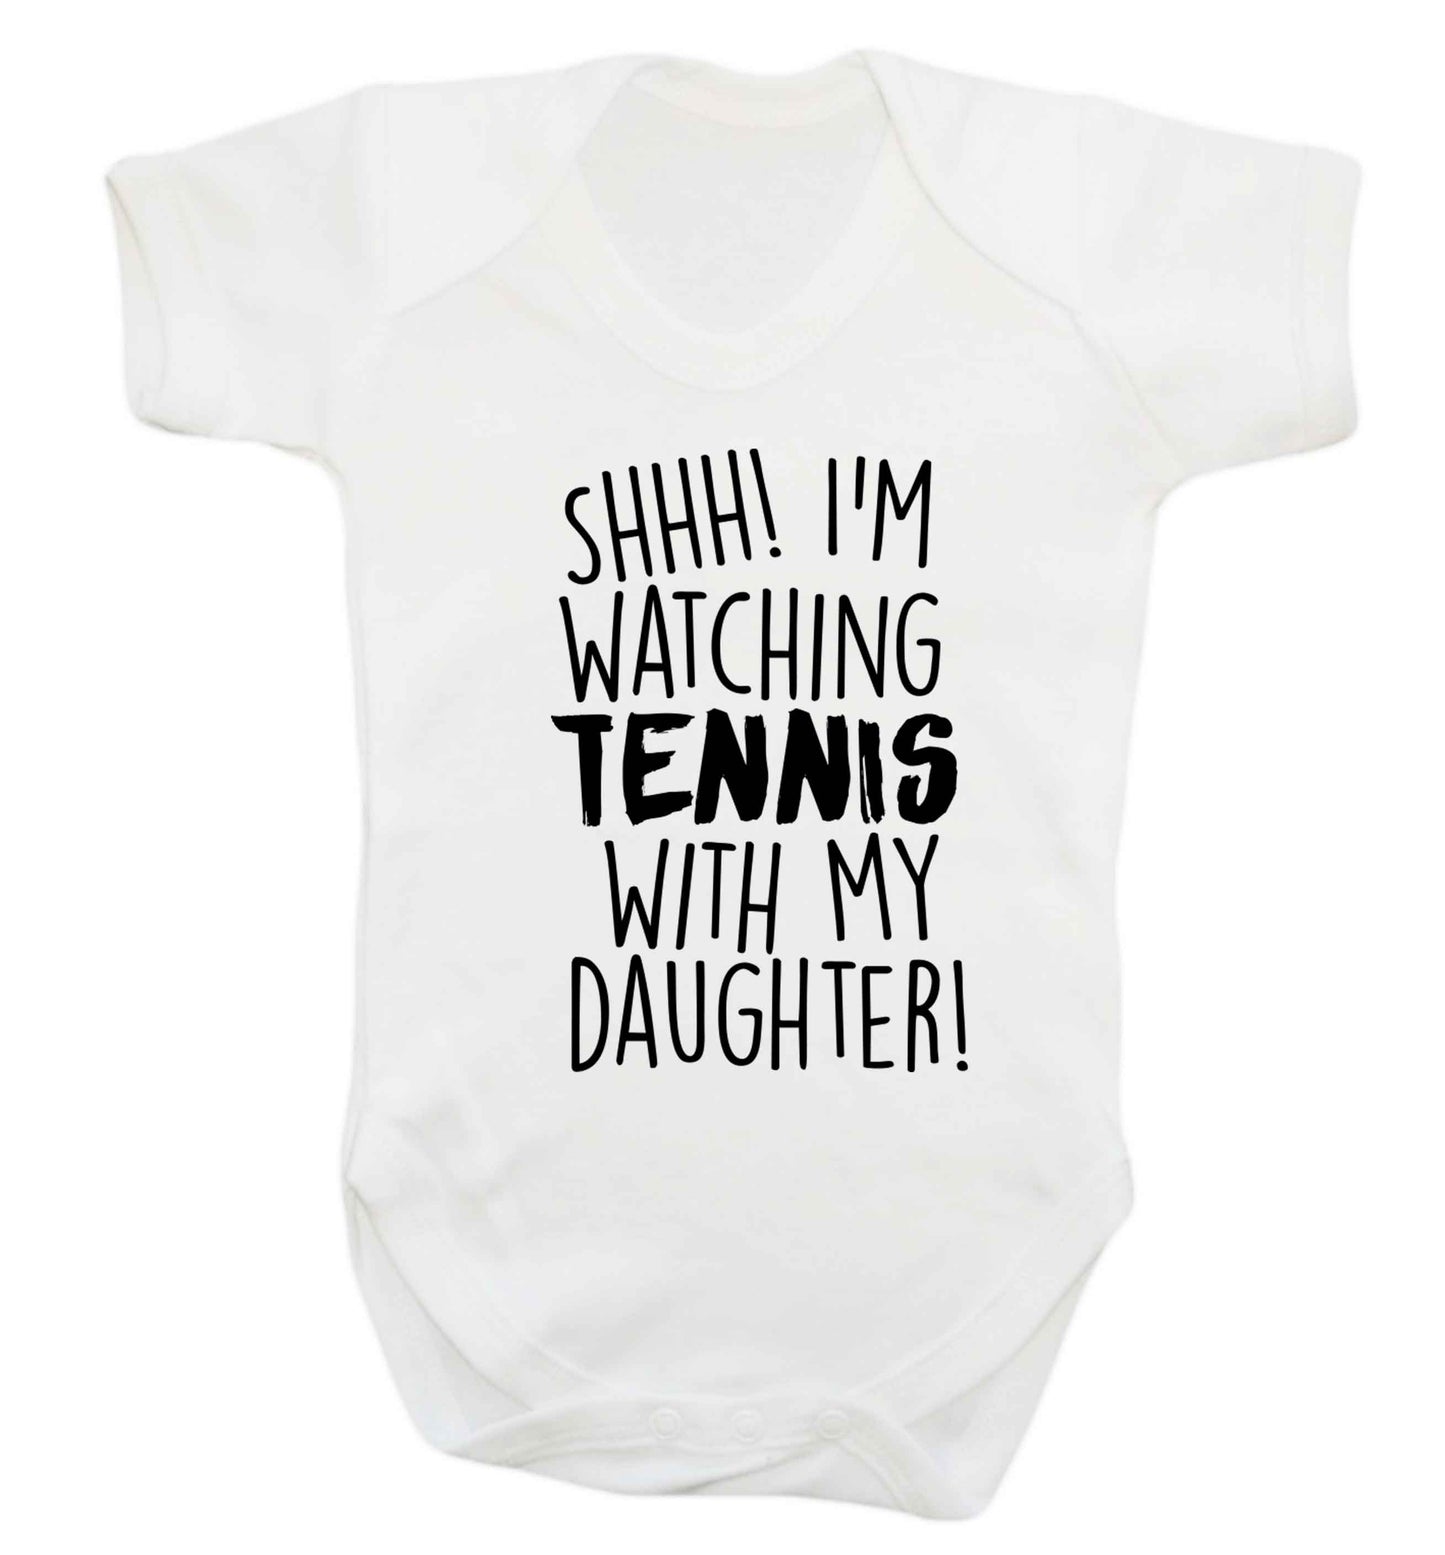 Shh! I'm watching tennis with my daughter! Baby Vest white 18-24 months